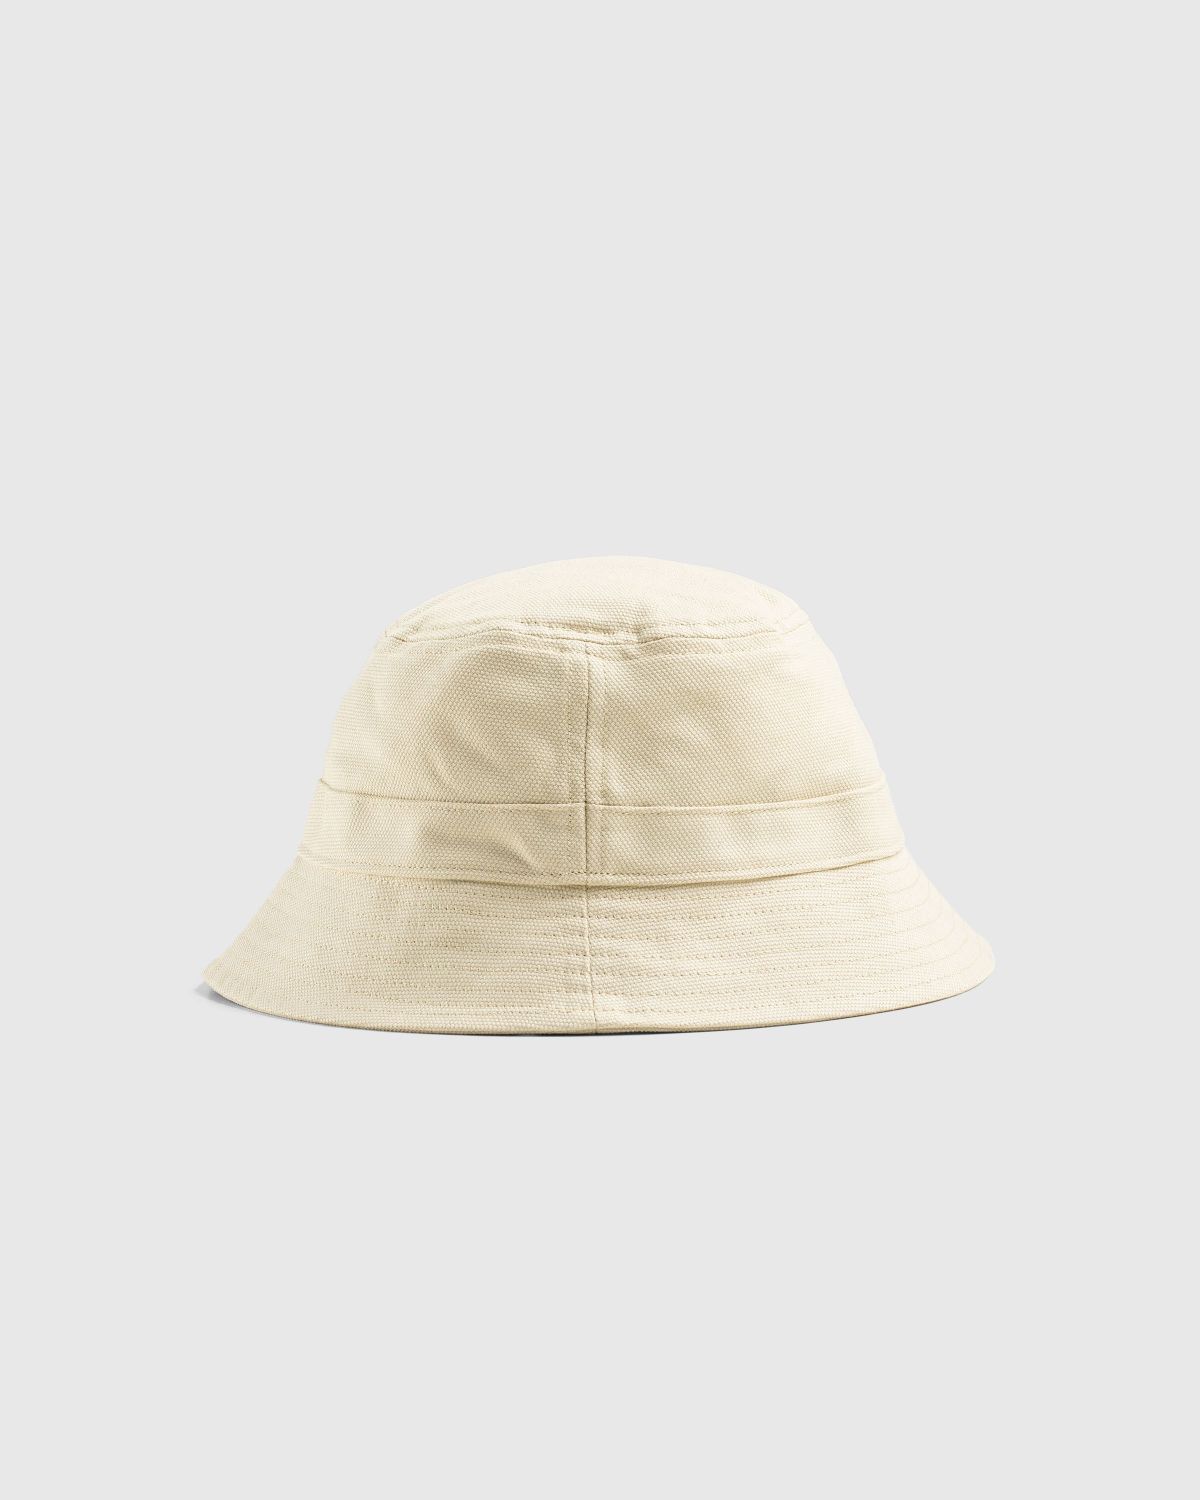 The North Face – Mountain Bucket Hat Gravel - Hats - Colorway - Image 2